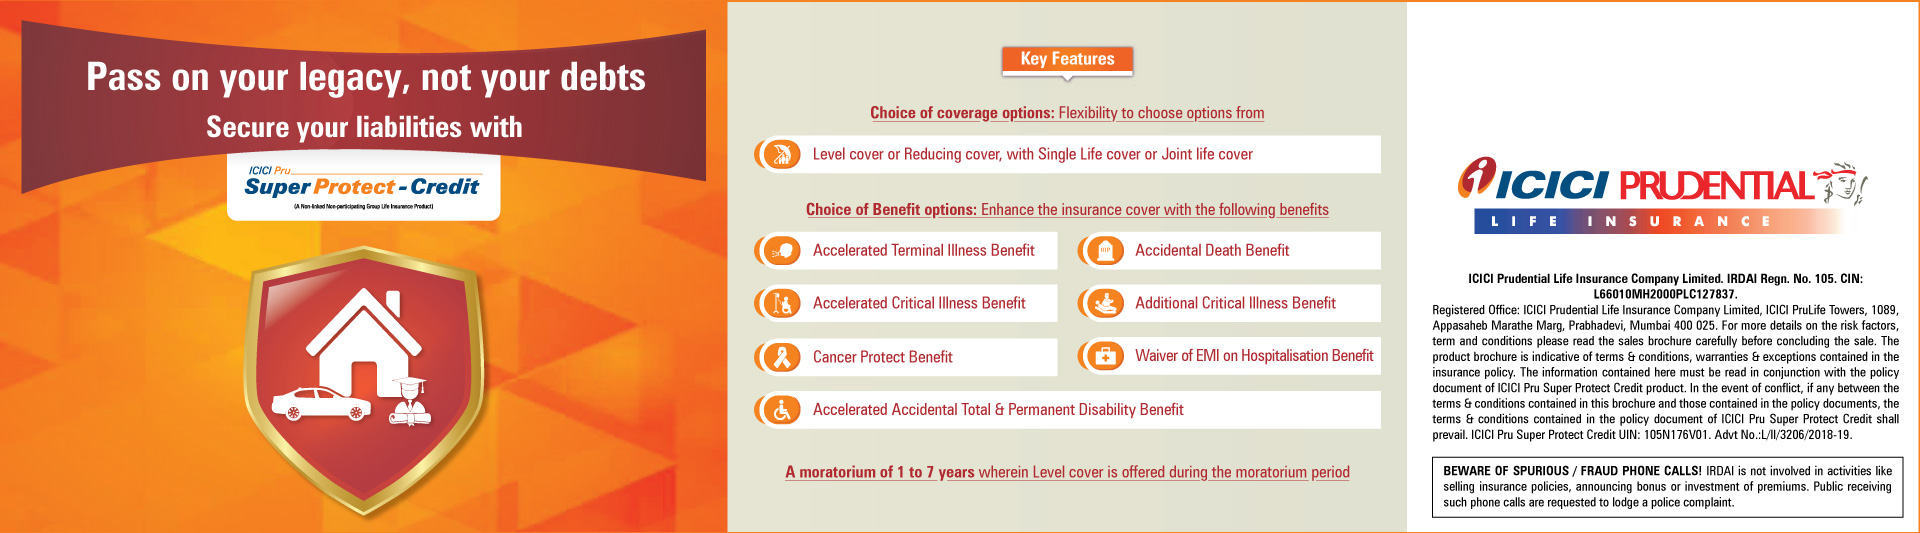 ICICI Prudential - Super Product Key Feature